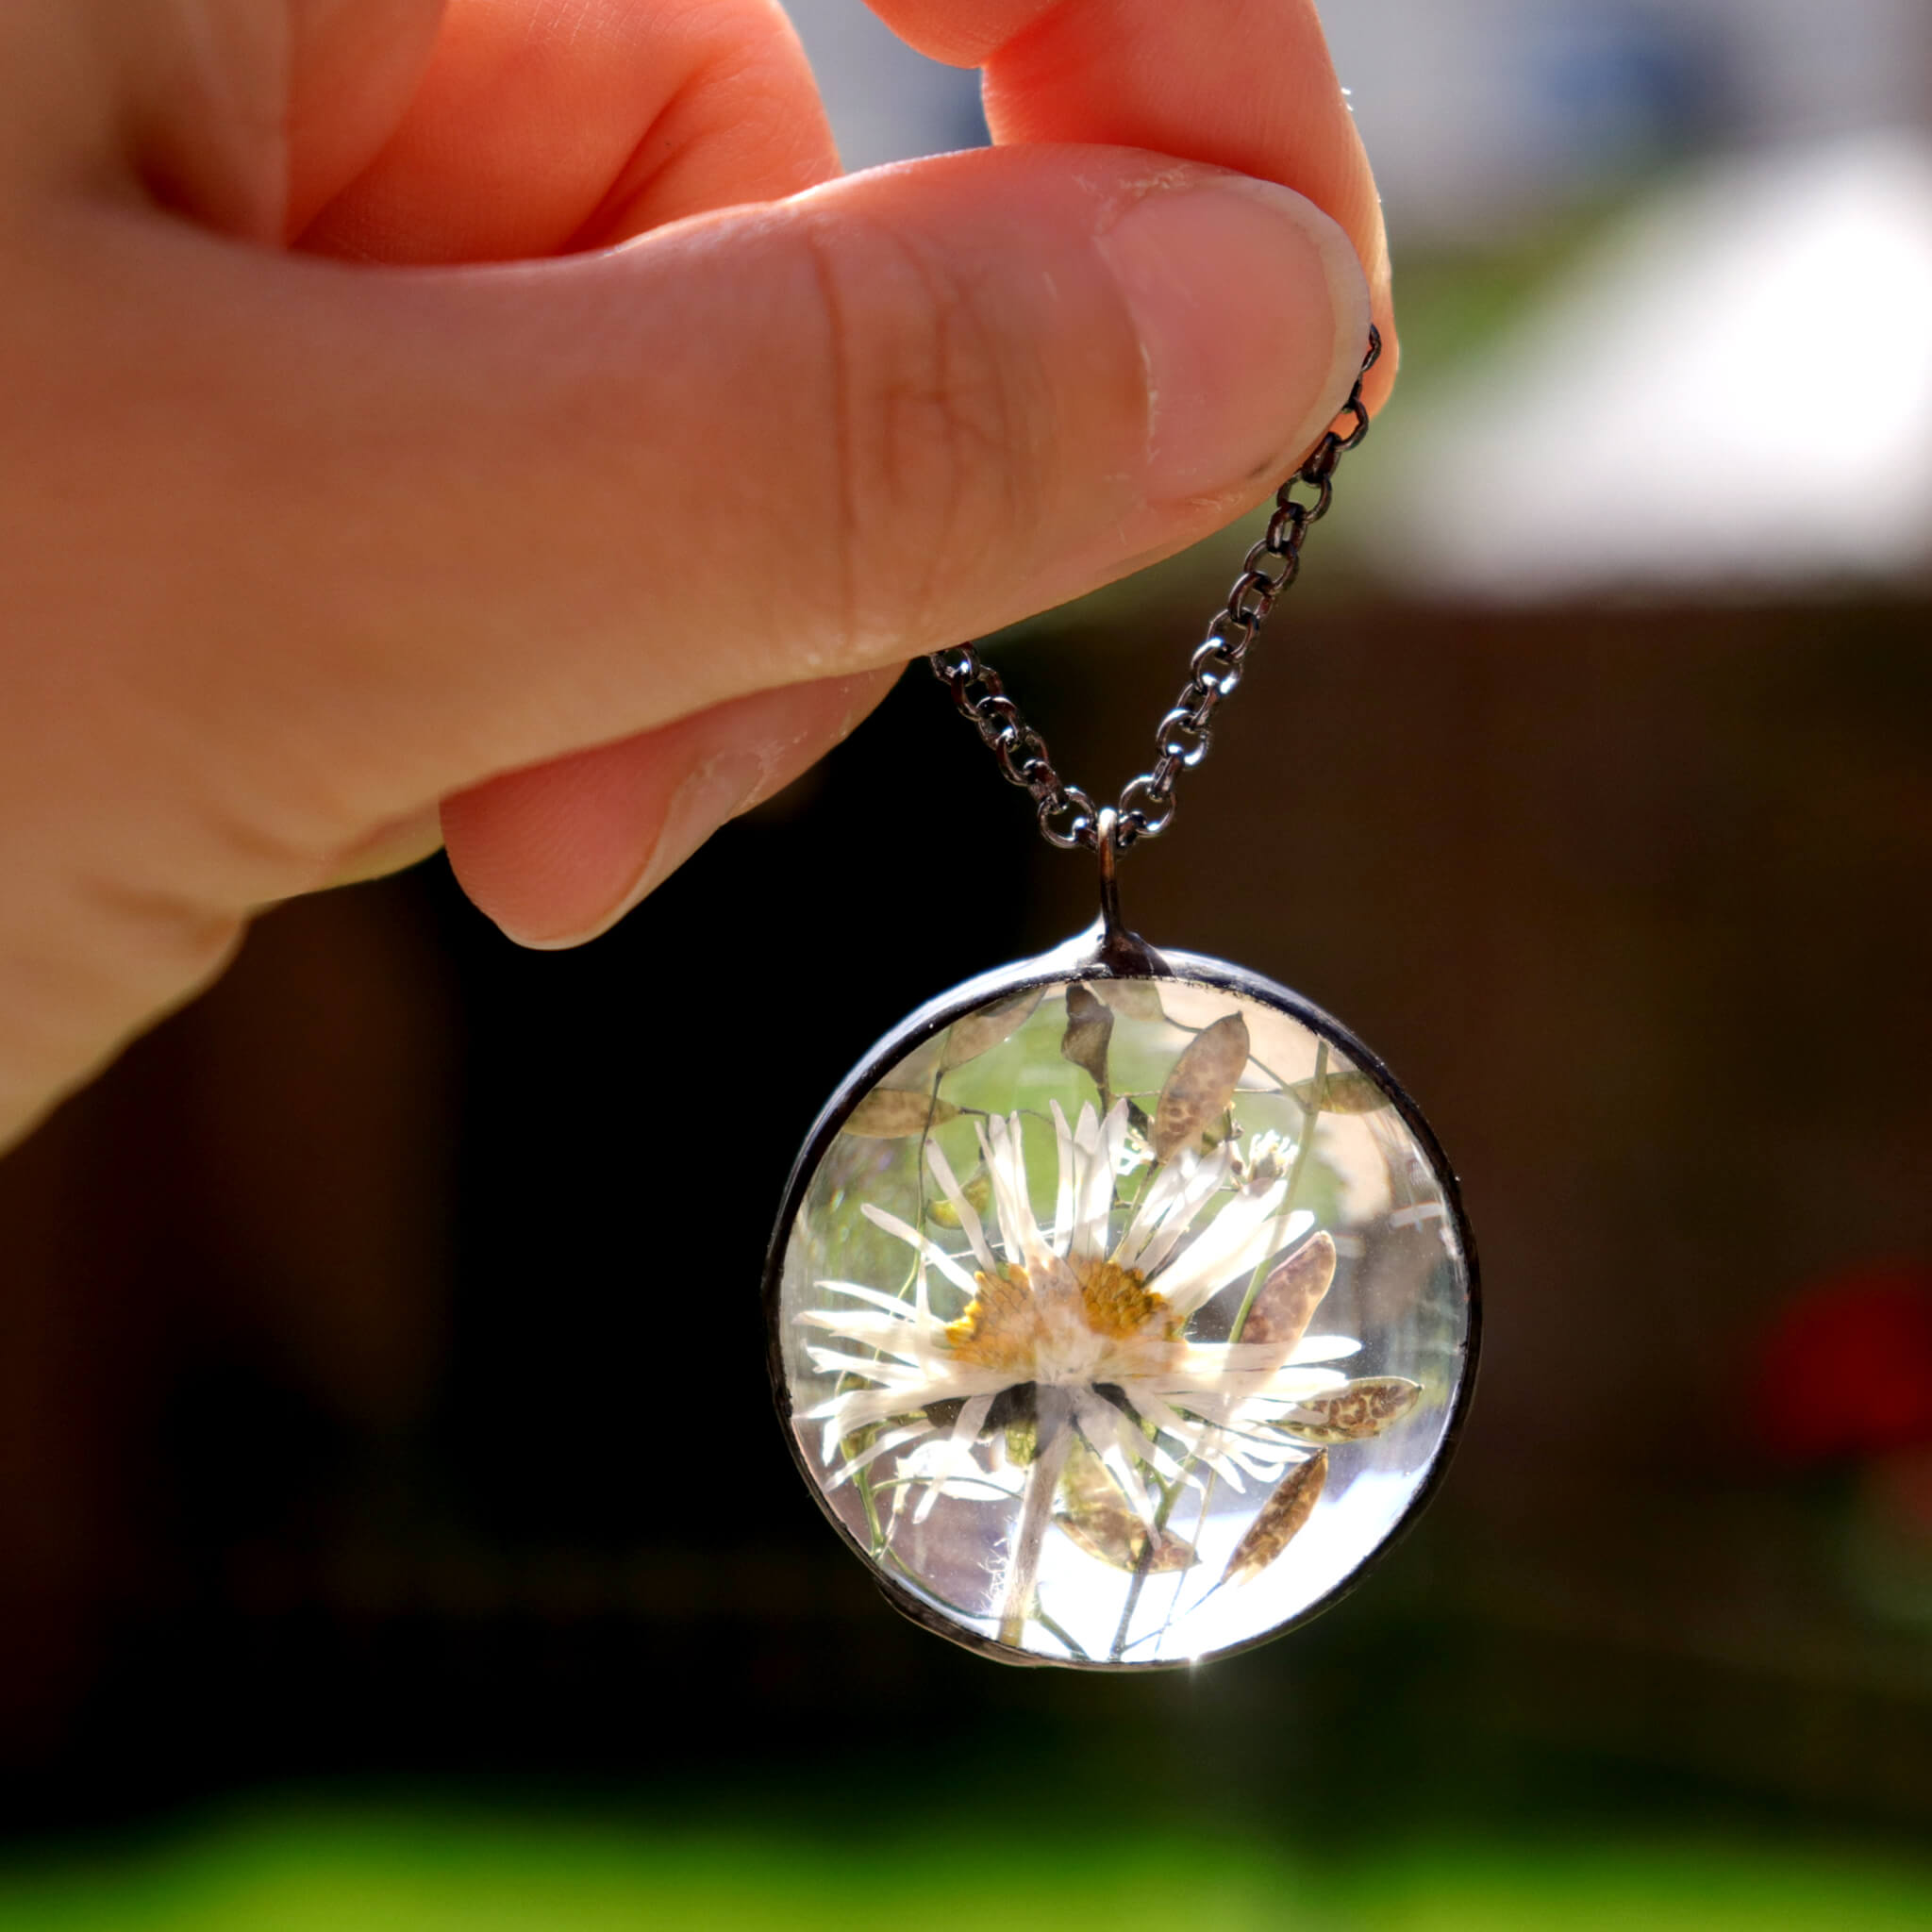 Hand holding round glass soldered necklace with pressed daisy inside on a dark background